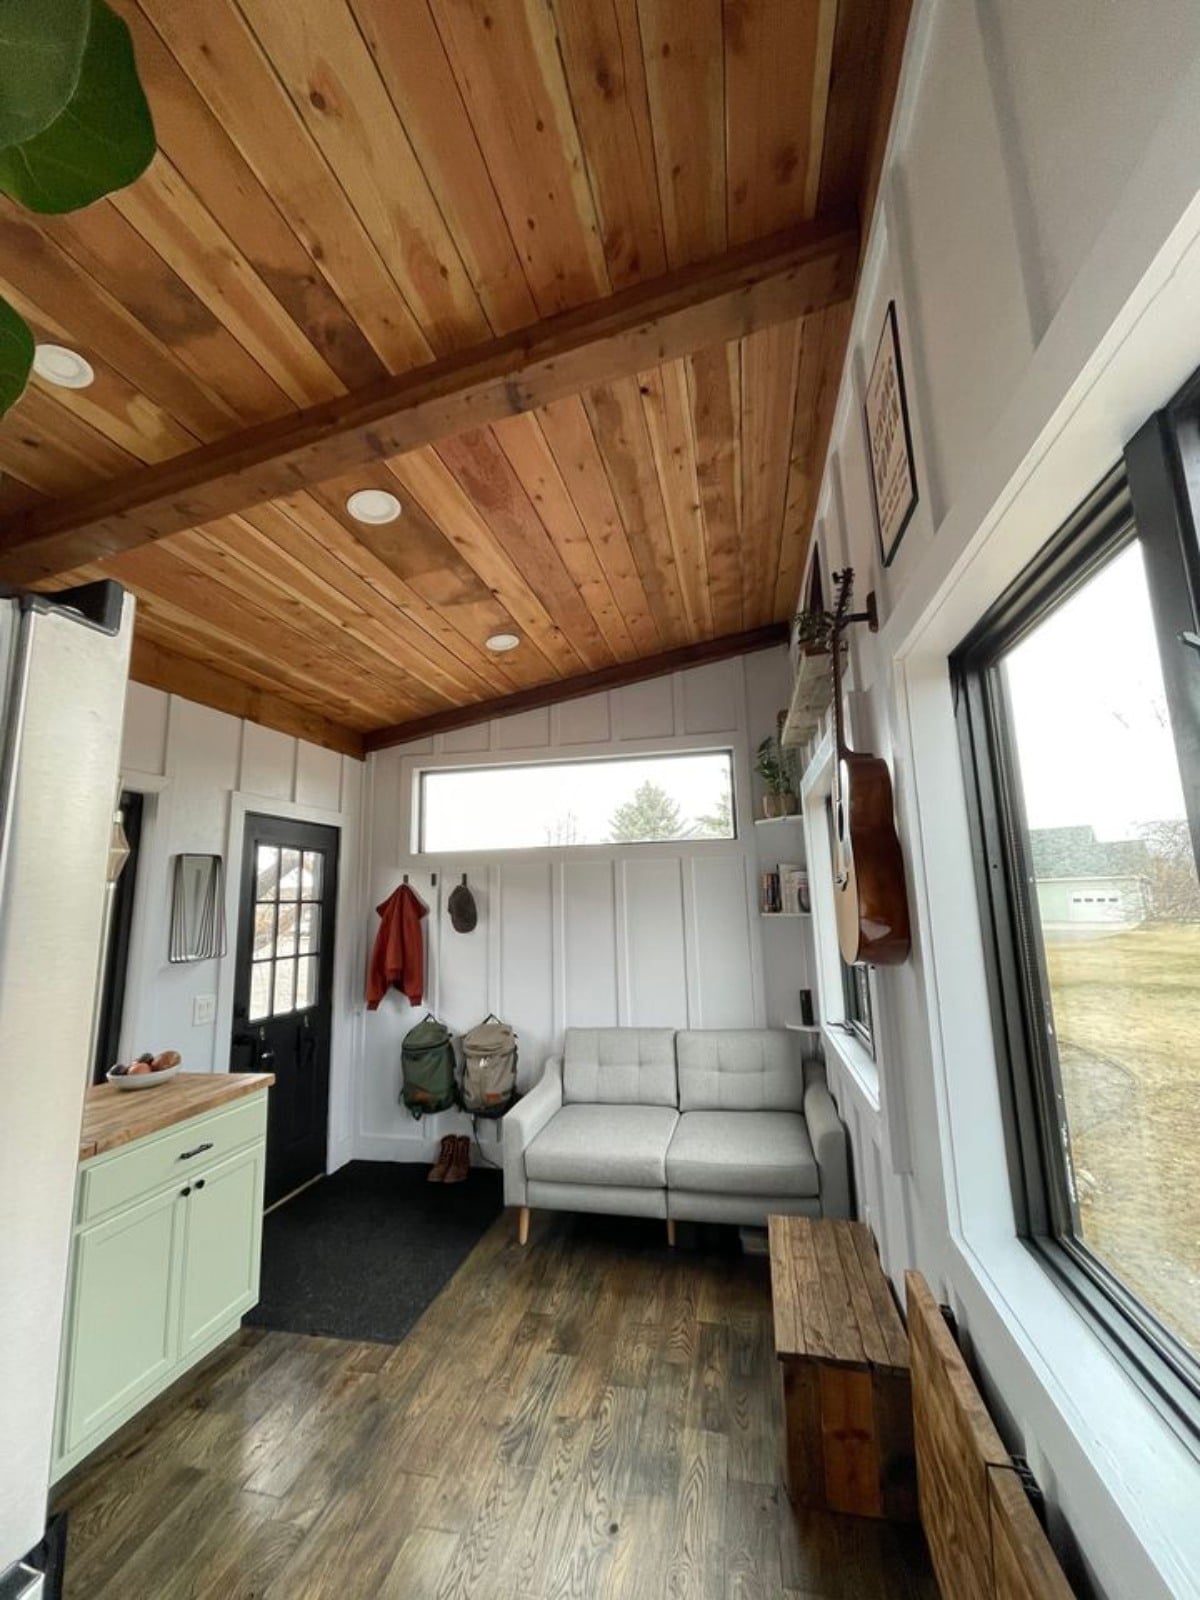 Living area of 30’ Tiny House on Wheels has a couch, storage and ample space to fit a small coffee table too